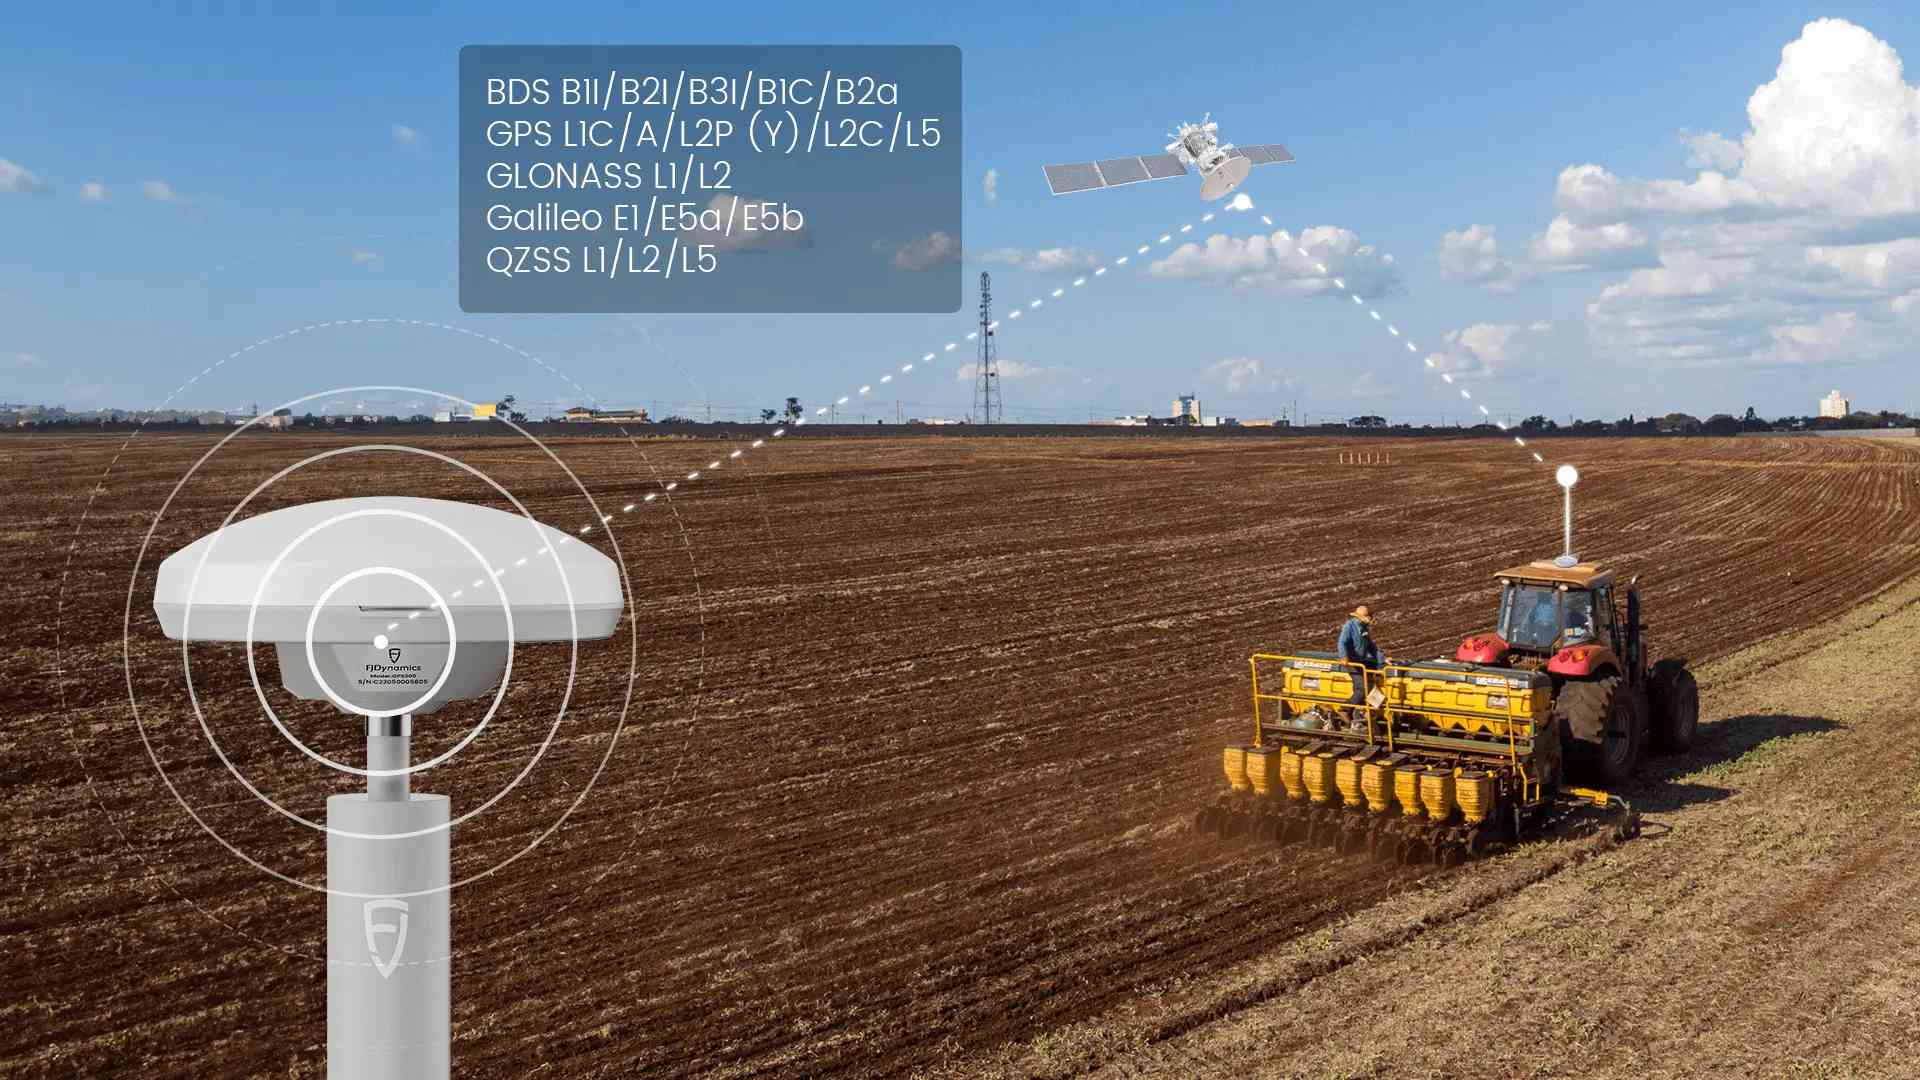 The RTK module boasts comprehensive support for various GNSS constellations including BDS, GPS, GLONASS, Galileo, and QZSS, covering a wide frequency range.